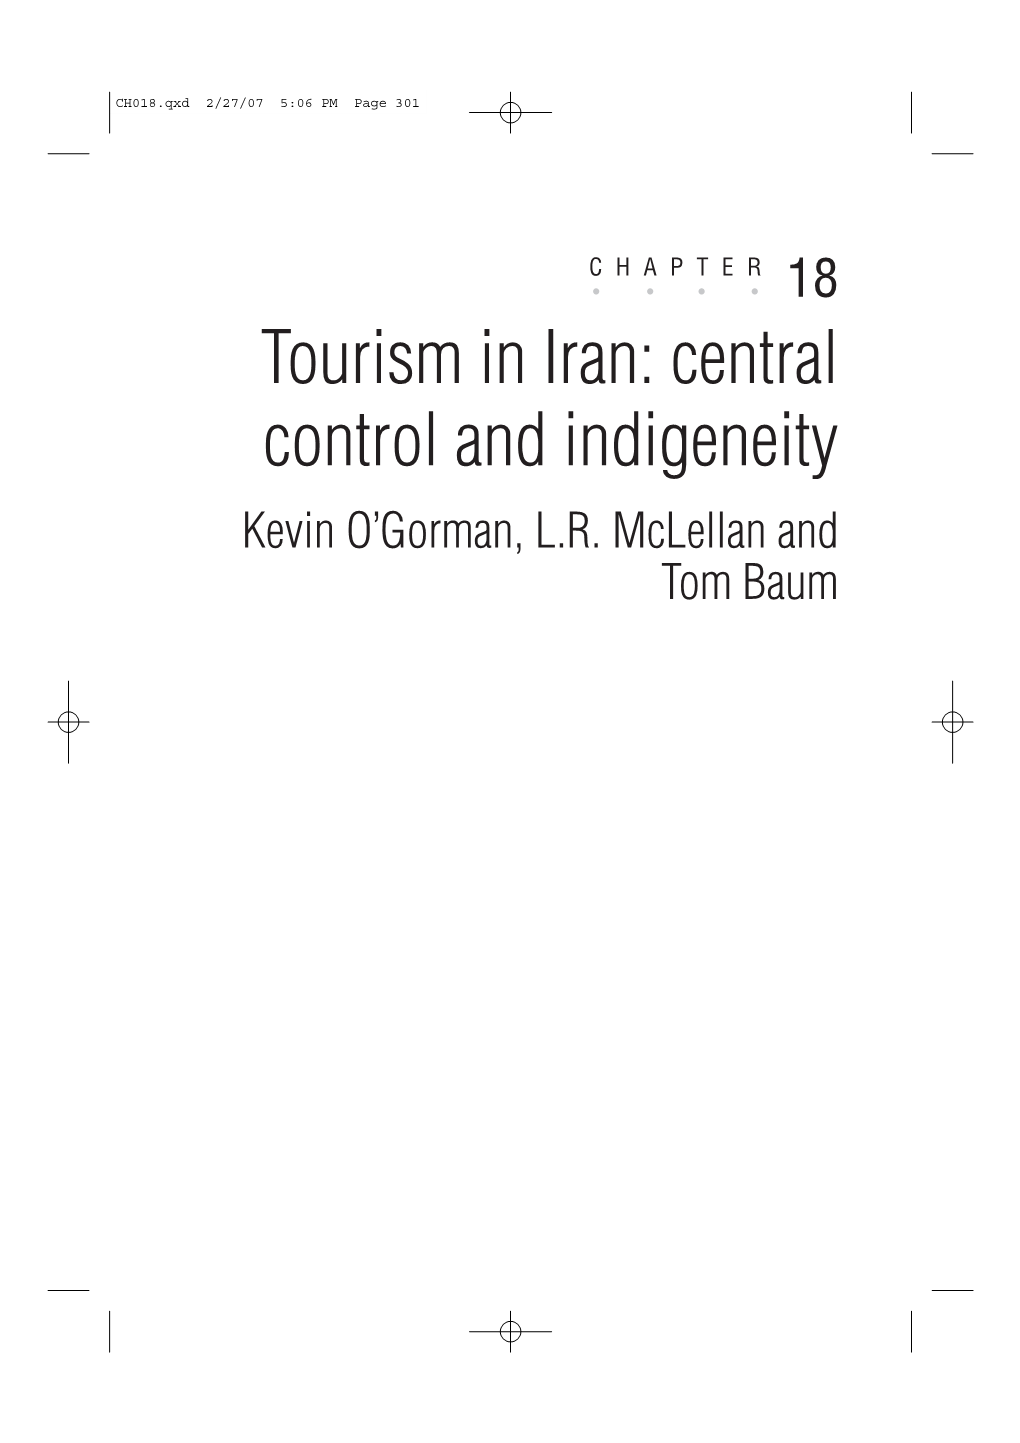 Tourism in Iran: Central Control and Indigeneity Kevin O’Gorman, L.R